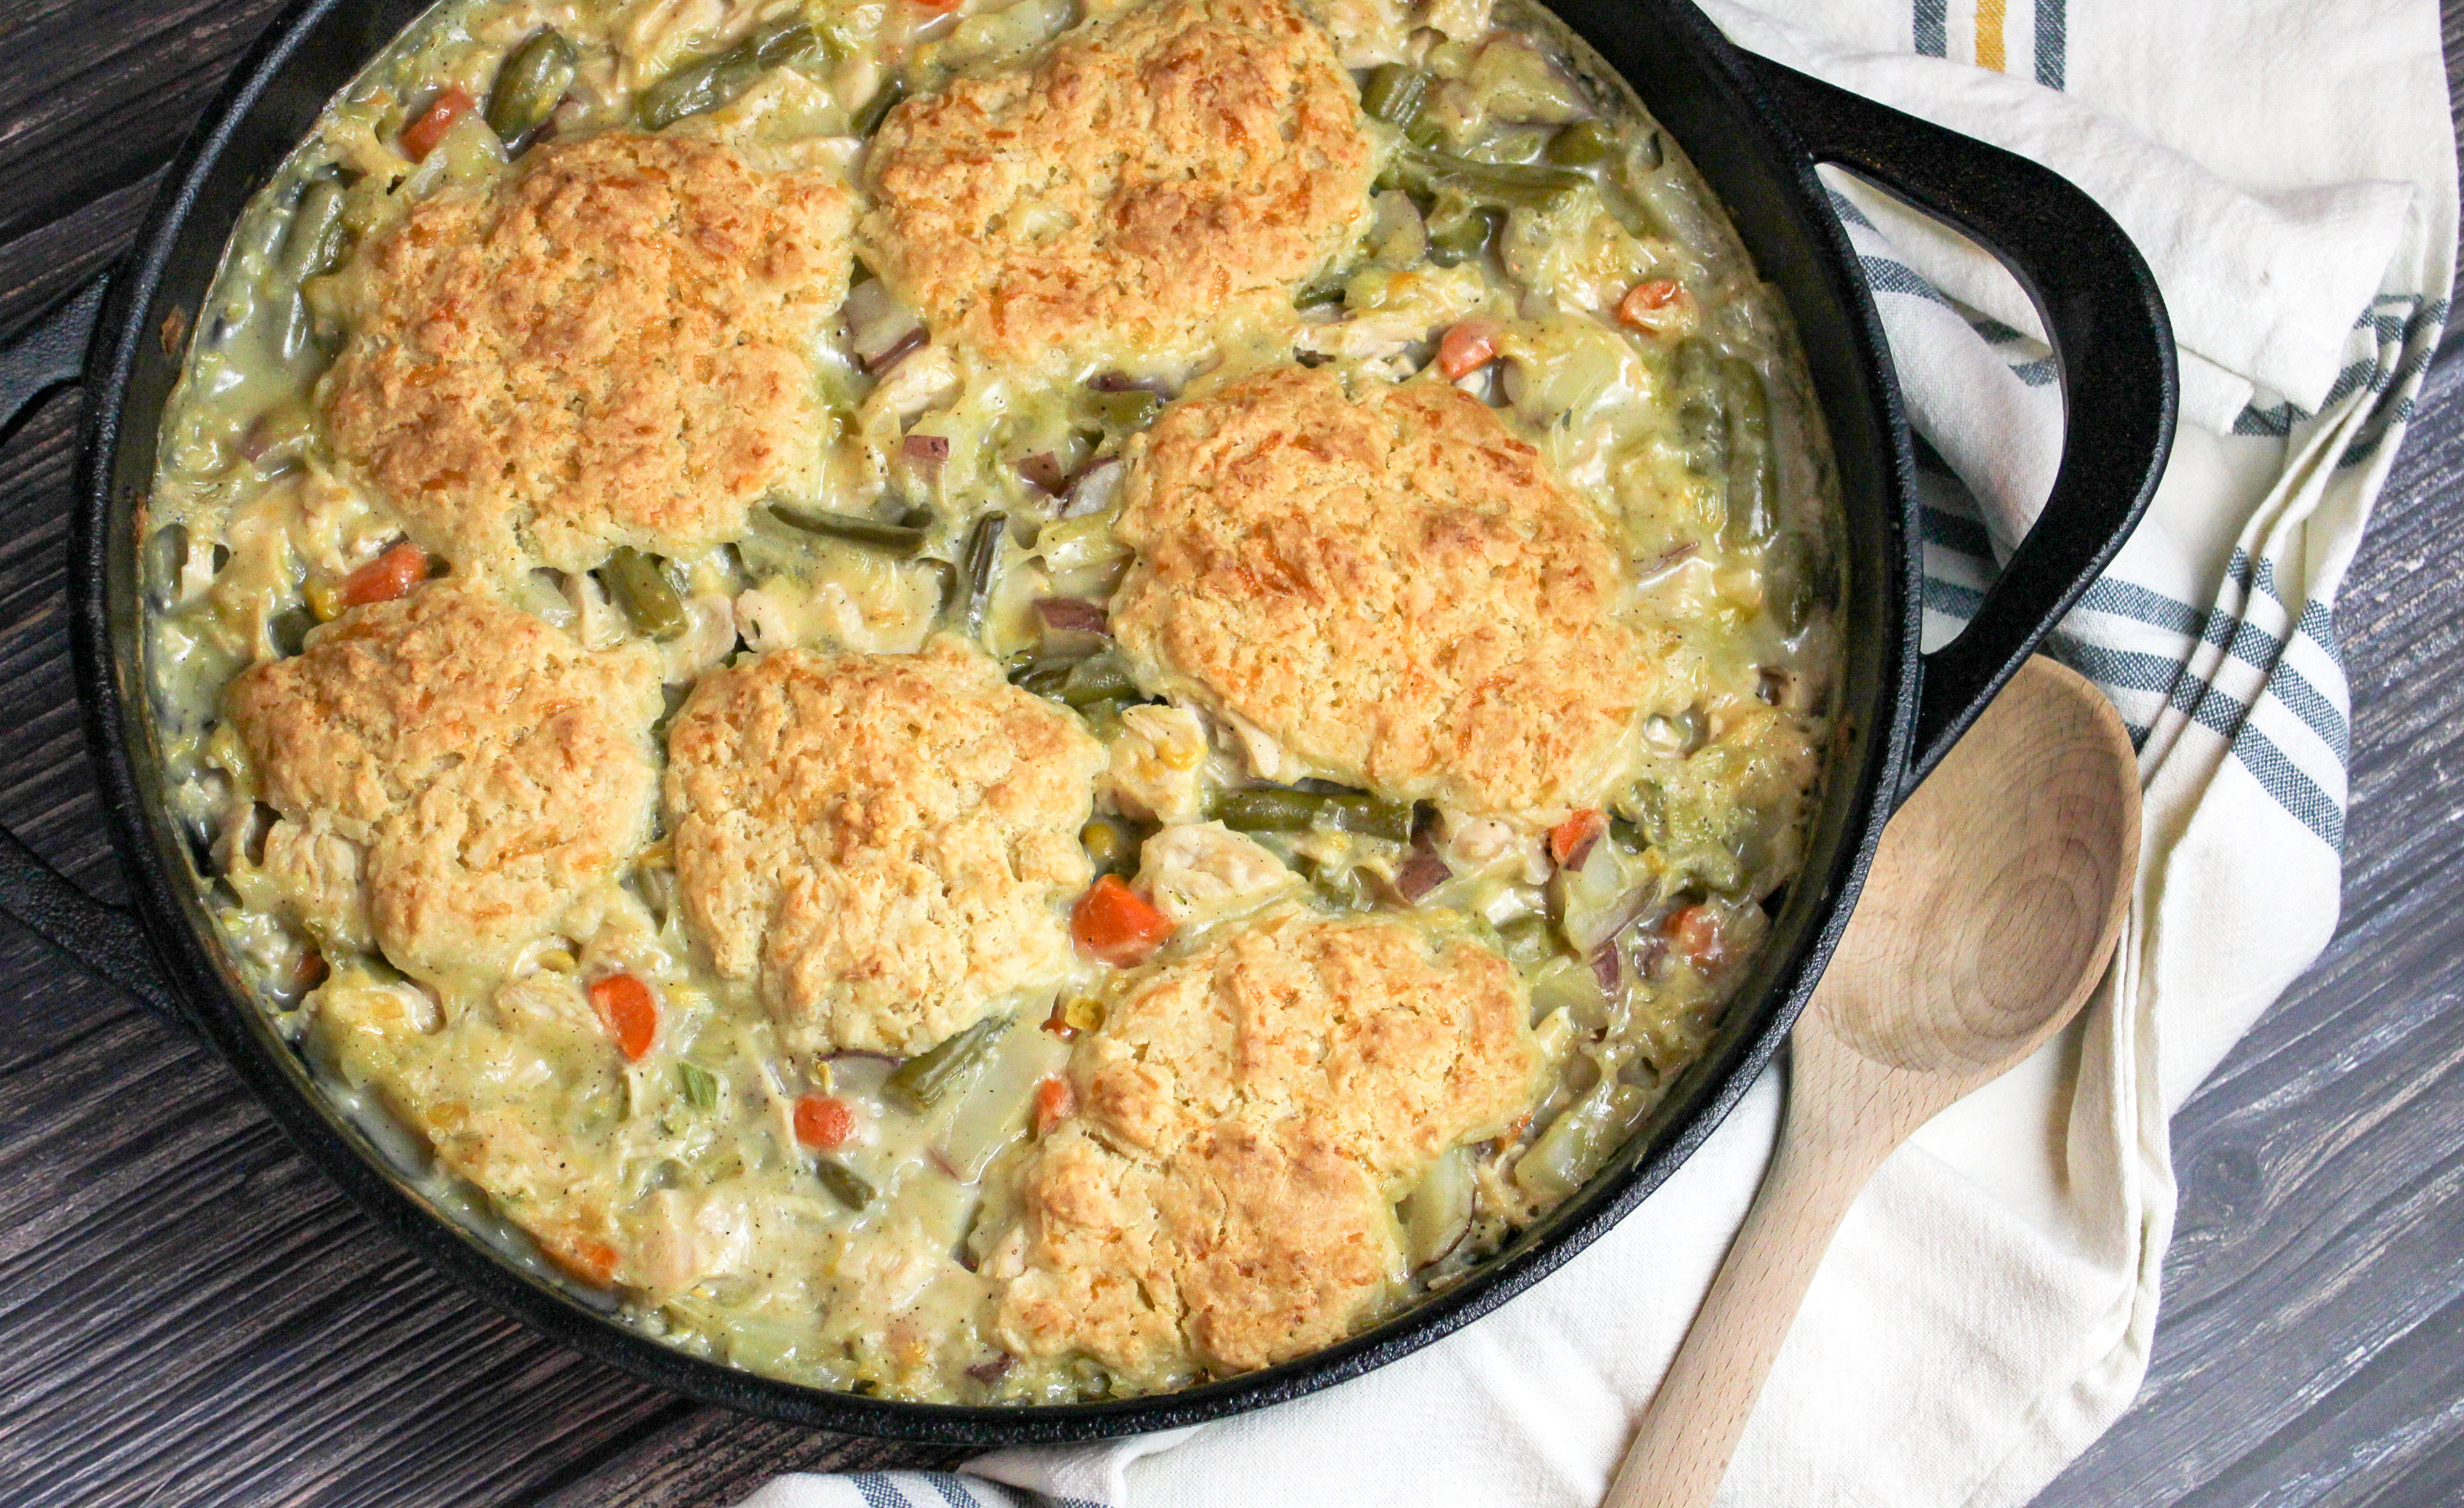 Creamy turkey shredded and baked with biscuits in a cast iron baking dish